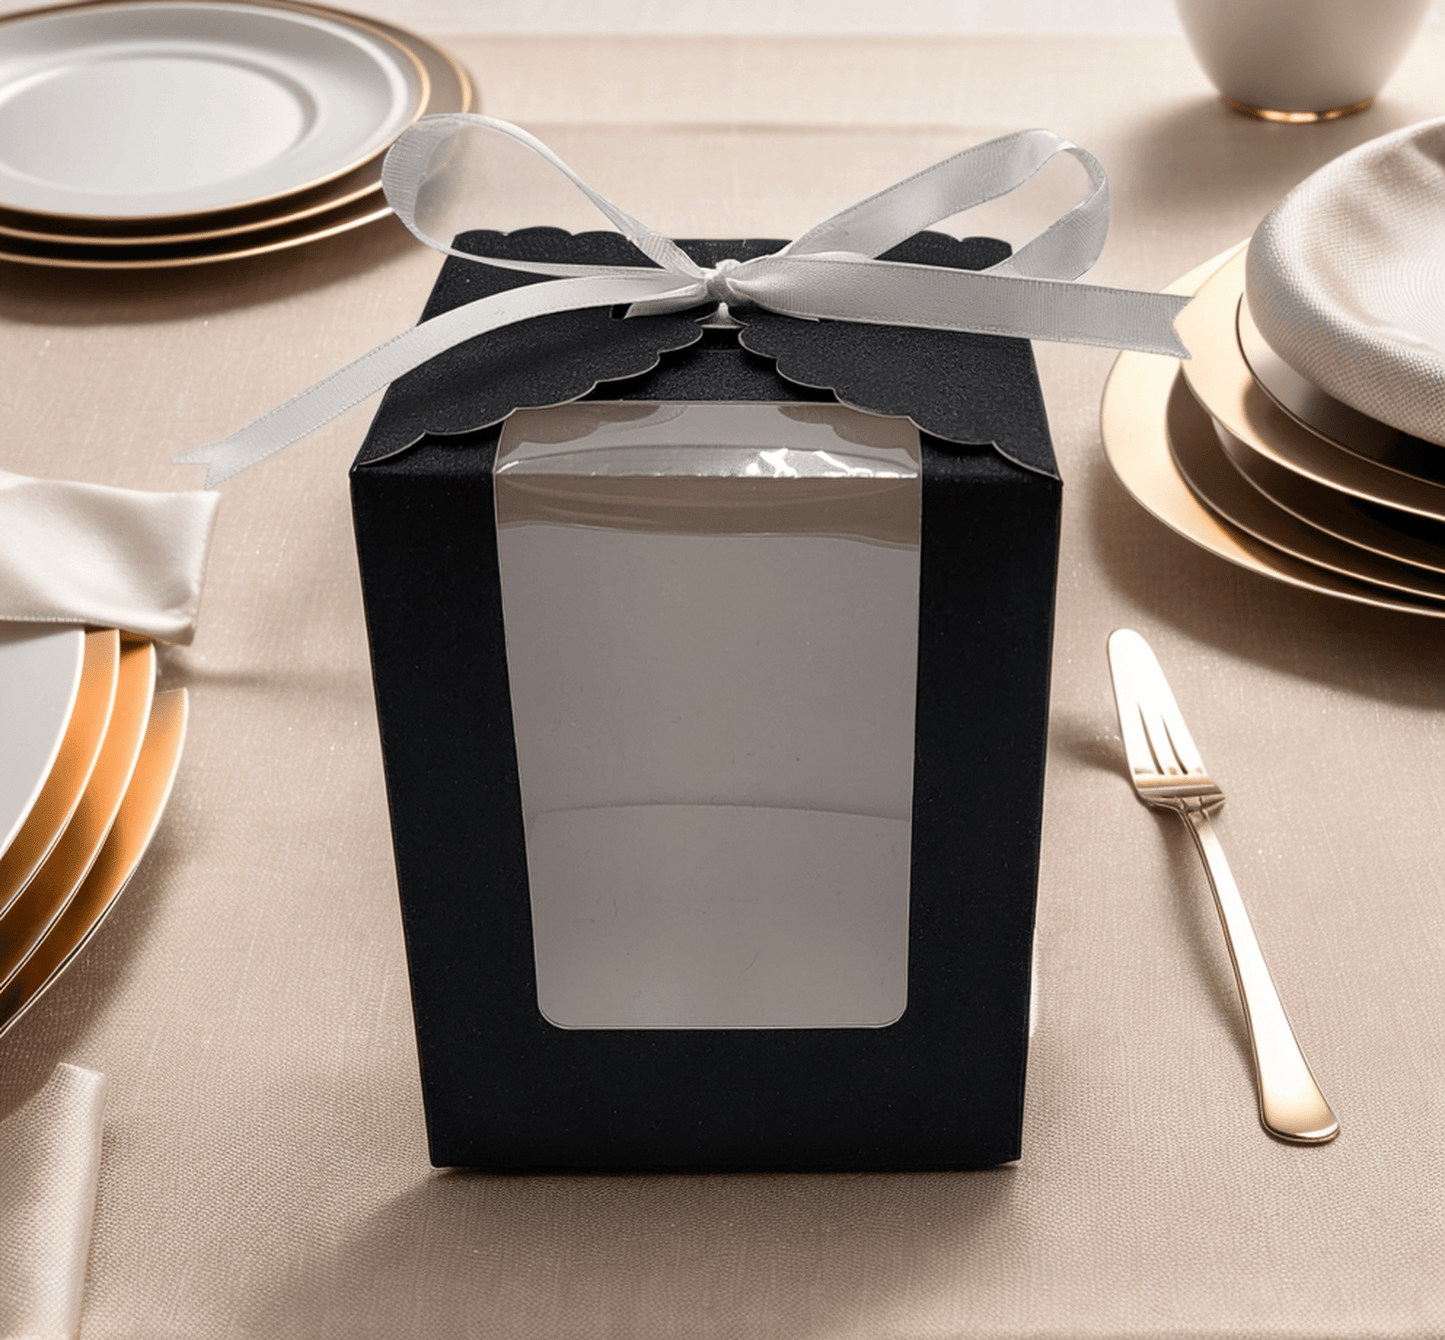 Black Sparkling Wedding Favor Box - 40 Count, Large 4"x4"x5" with Clear Display Window. Includes 2 Ribbon Colors (White and Black). Elegant Stemless Wine Glass Gift Box-Holds 15 oz Glass. Extra Bottom Insert for Durability. Ideal for Weddings & Events - T and C Party Supply T and C Party Supply